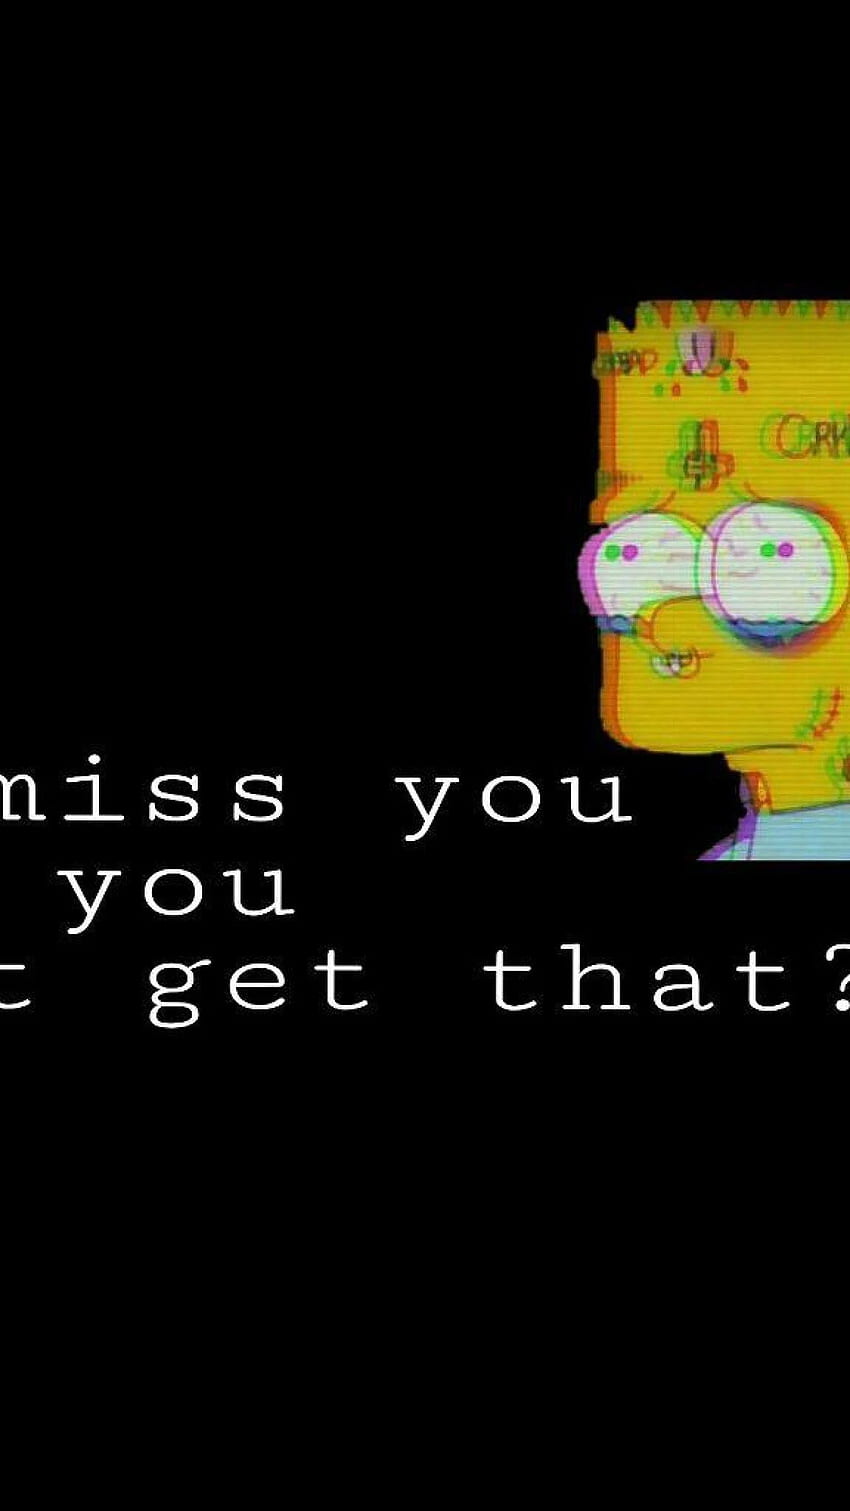 I miss you. Can you get that? - Depressing